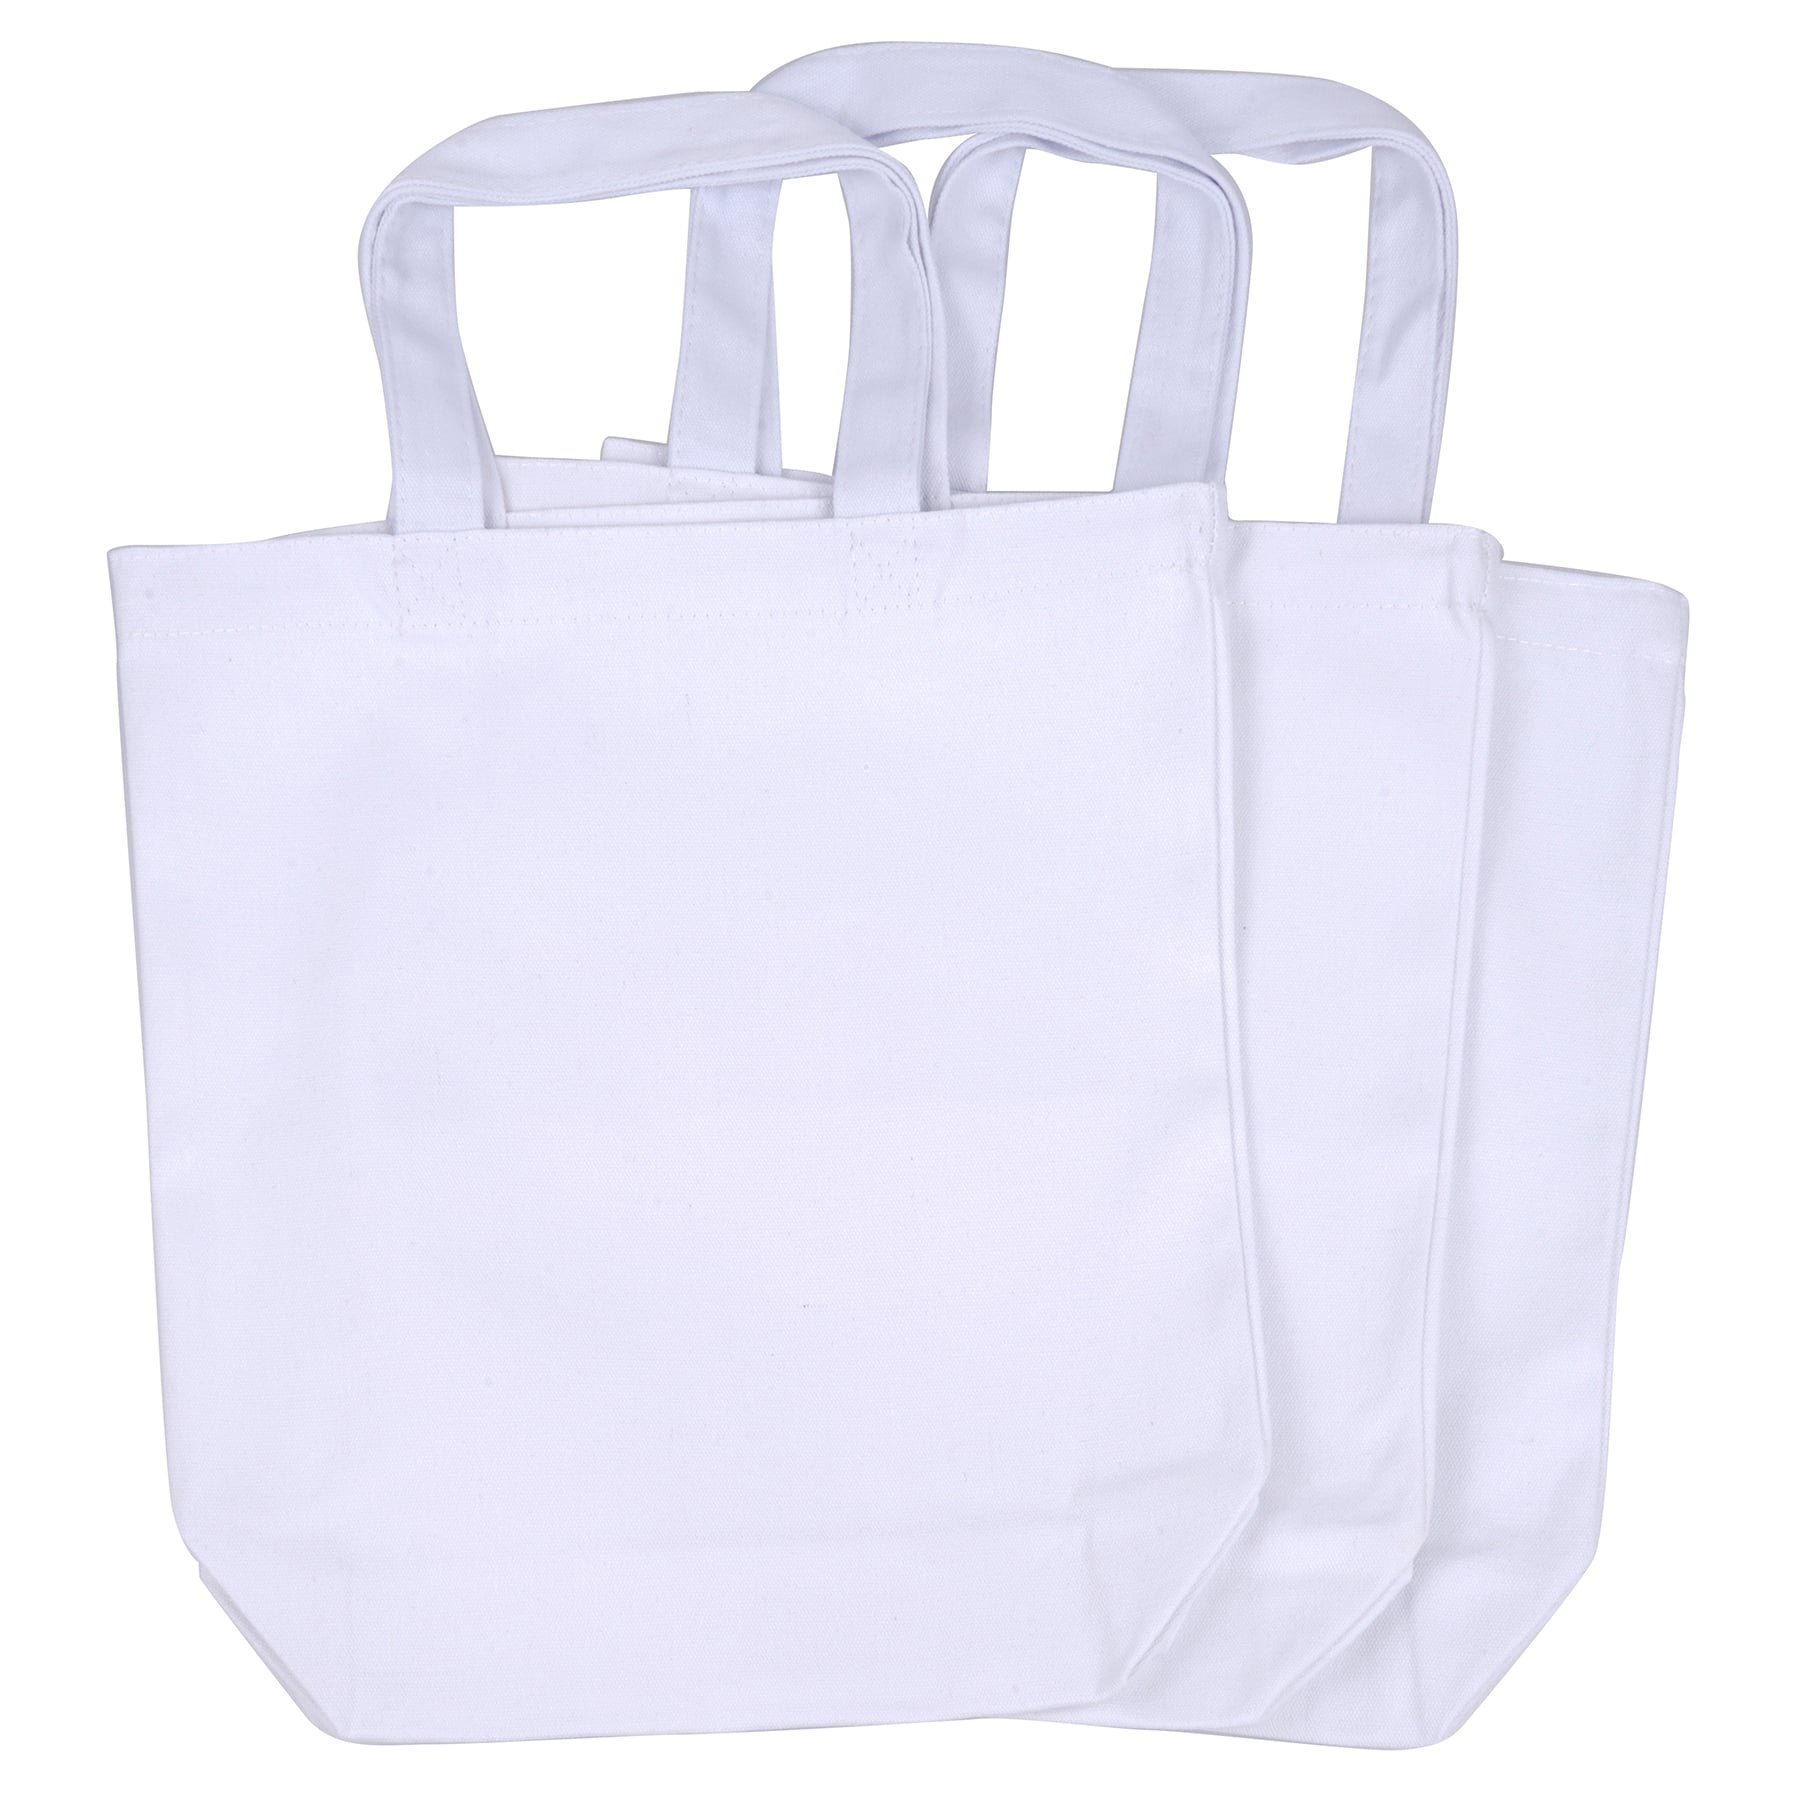 12pk White Cotton Tote Bags (14x 13x 3 - 12pk) 100% Cotton Canvas -  Great for Party Favors, Gift Bags, Shopping & DIY Crafts - White